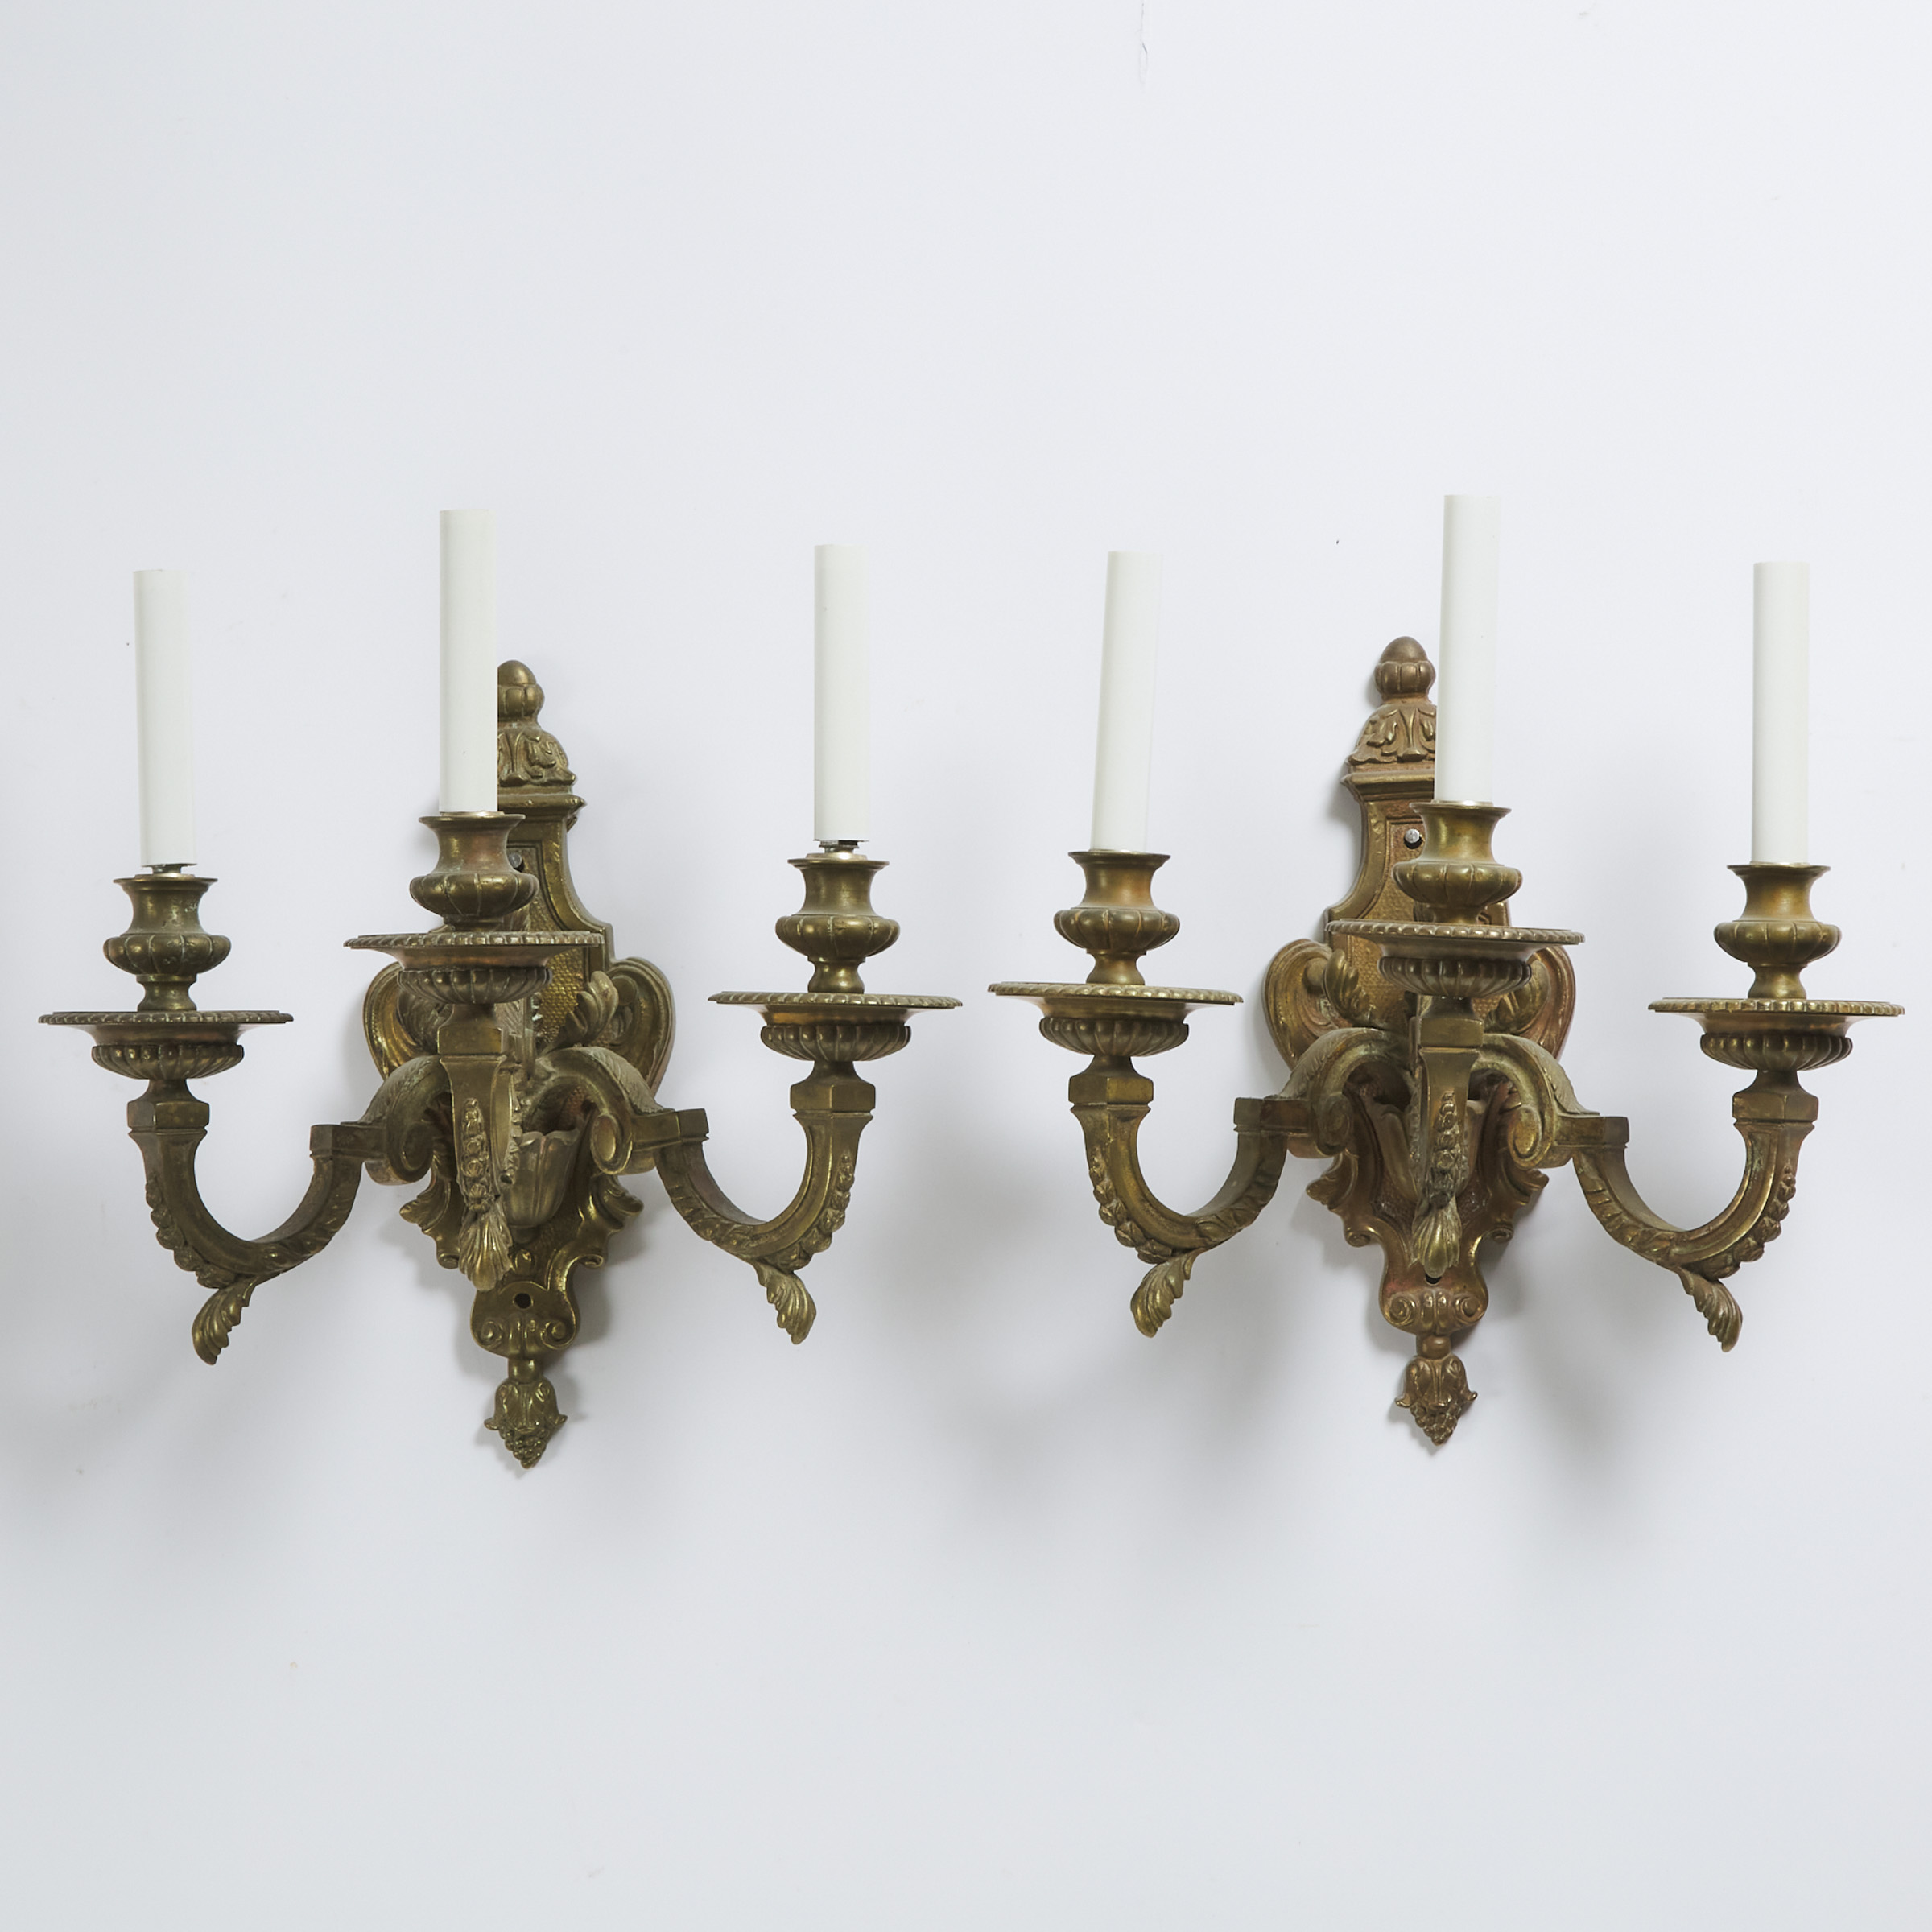 Pair of French 18th Century Style Three Light Gilt Bronze Wall Sconces, early 20th century